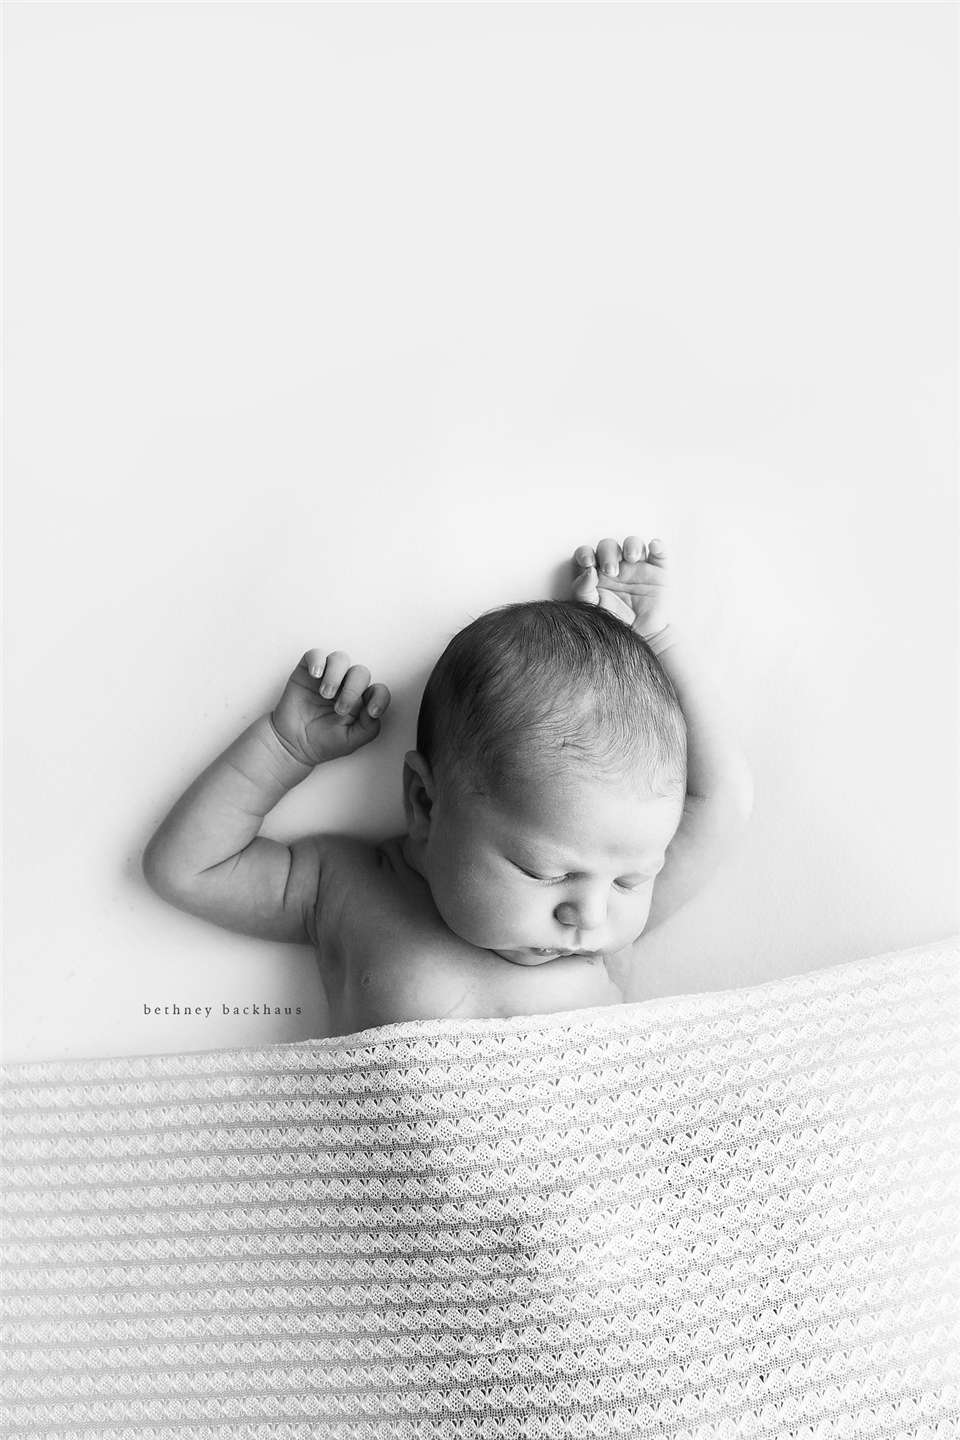 newborn photography community critique photo submitted by Bethney Backhaus - 6 community members set this photo as a favourite image.